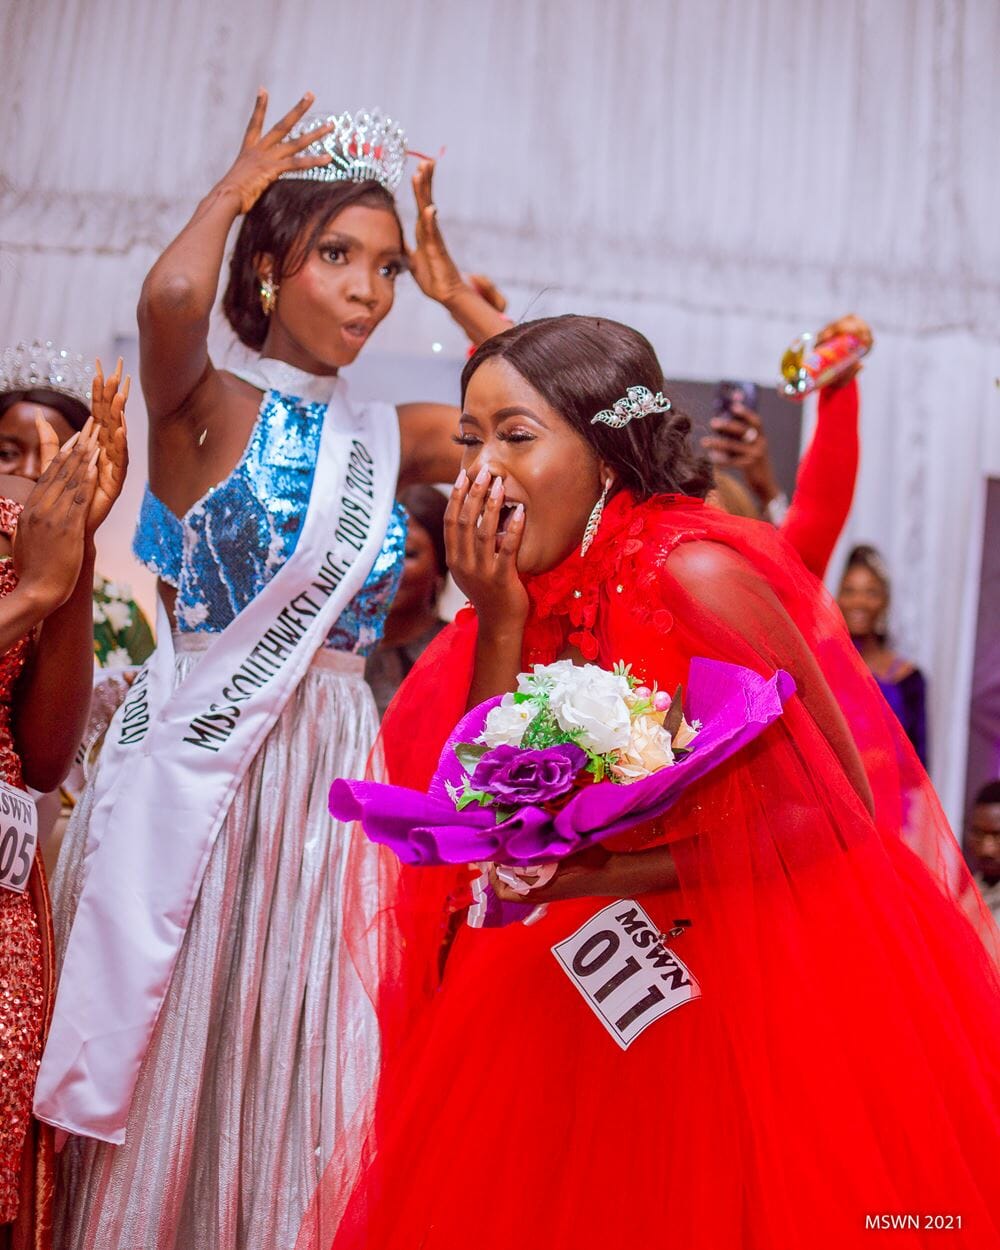 Miss South West Nigeria Crowns New Queen, Wende Oluwaseun Beatrice (Photos)